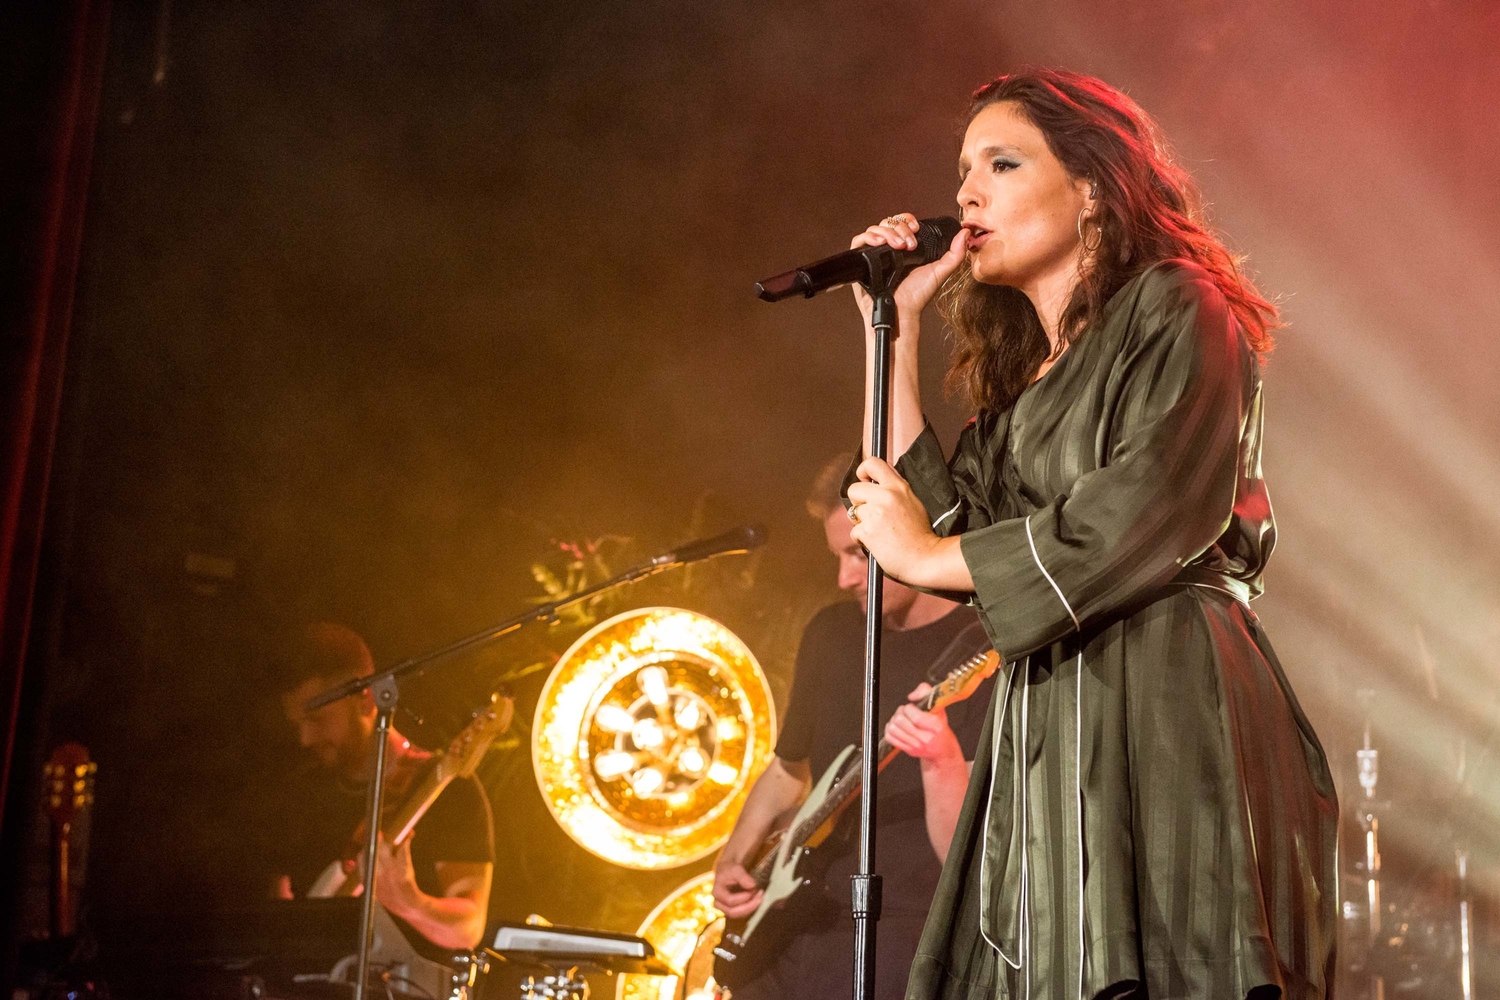 Jessie Ware, SOPHIE and more to play Pohoda Festival 2018